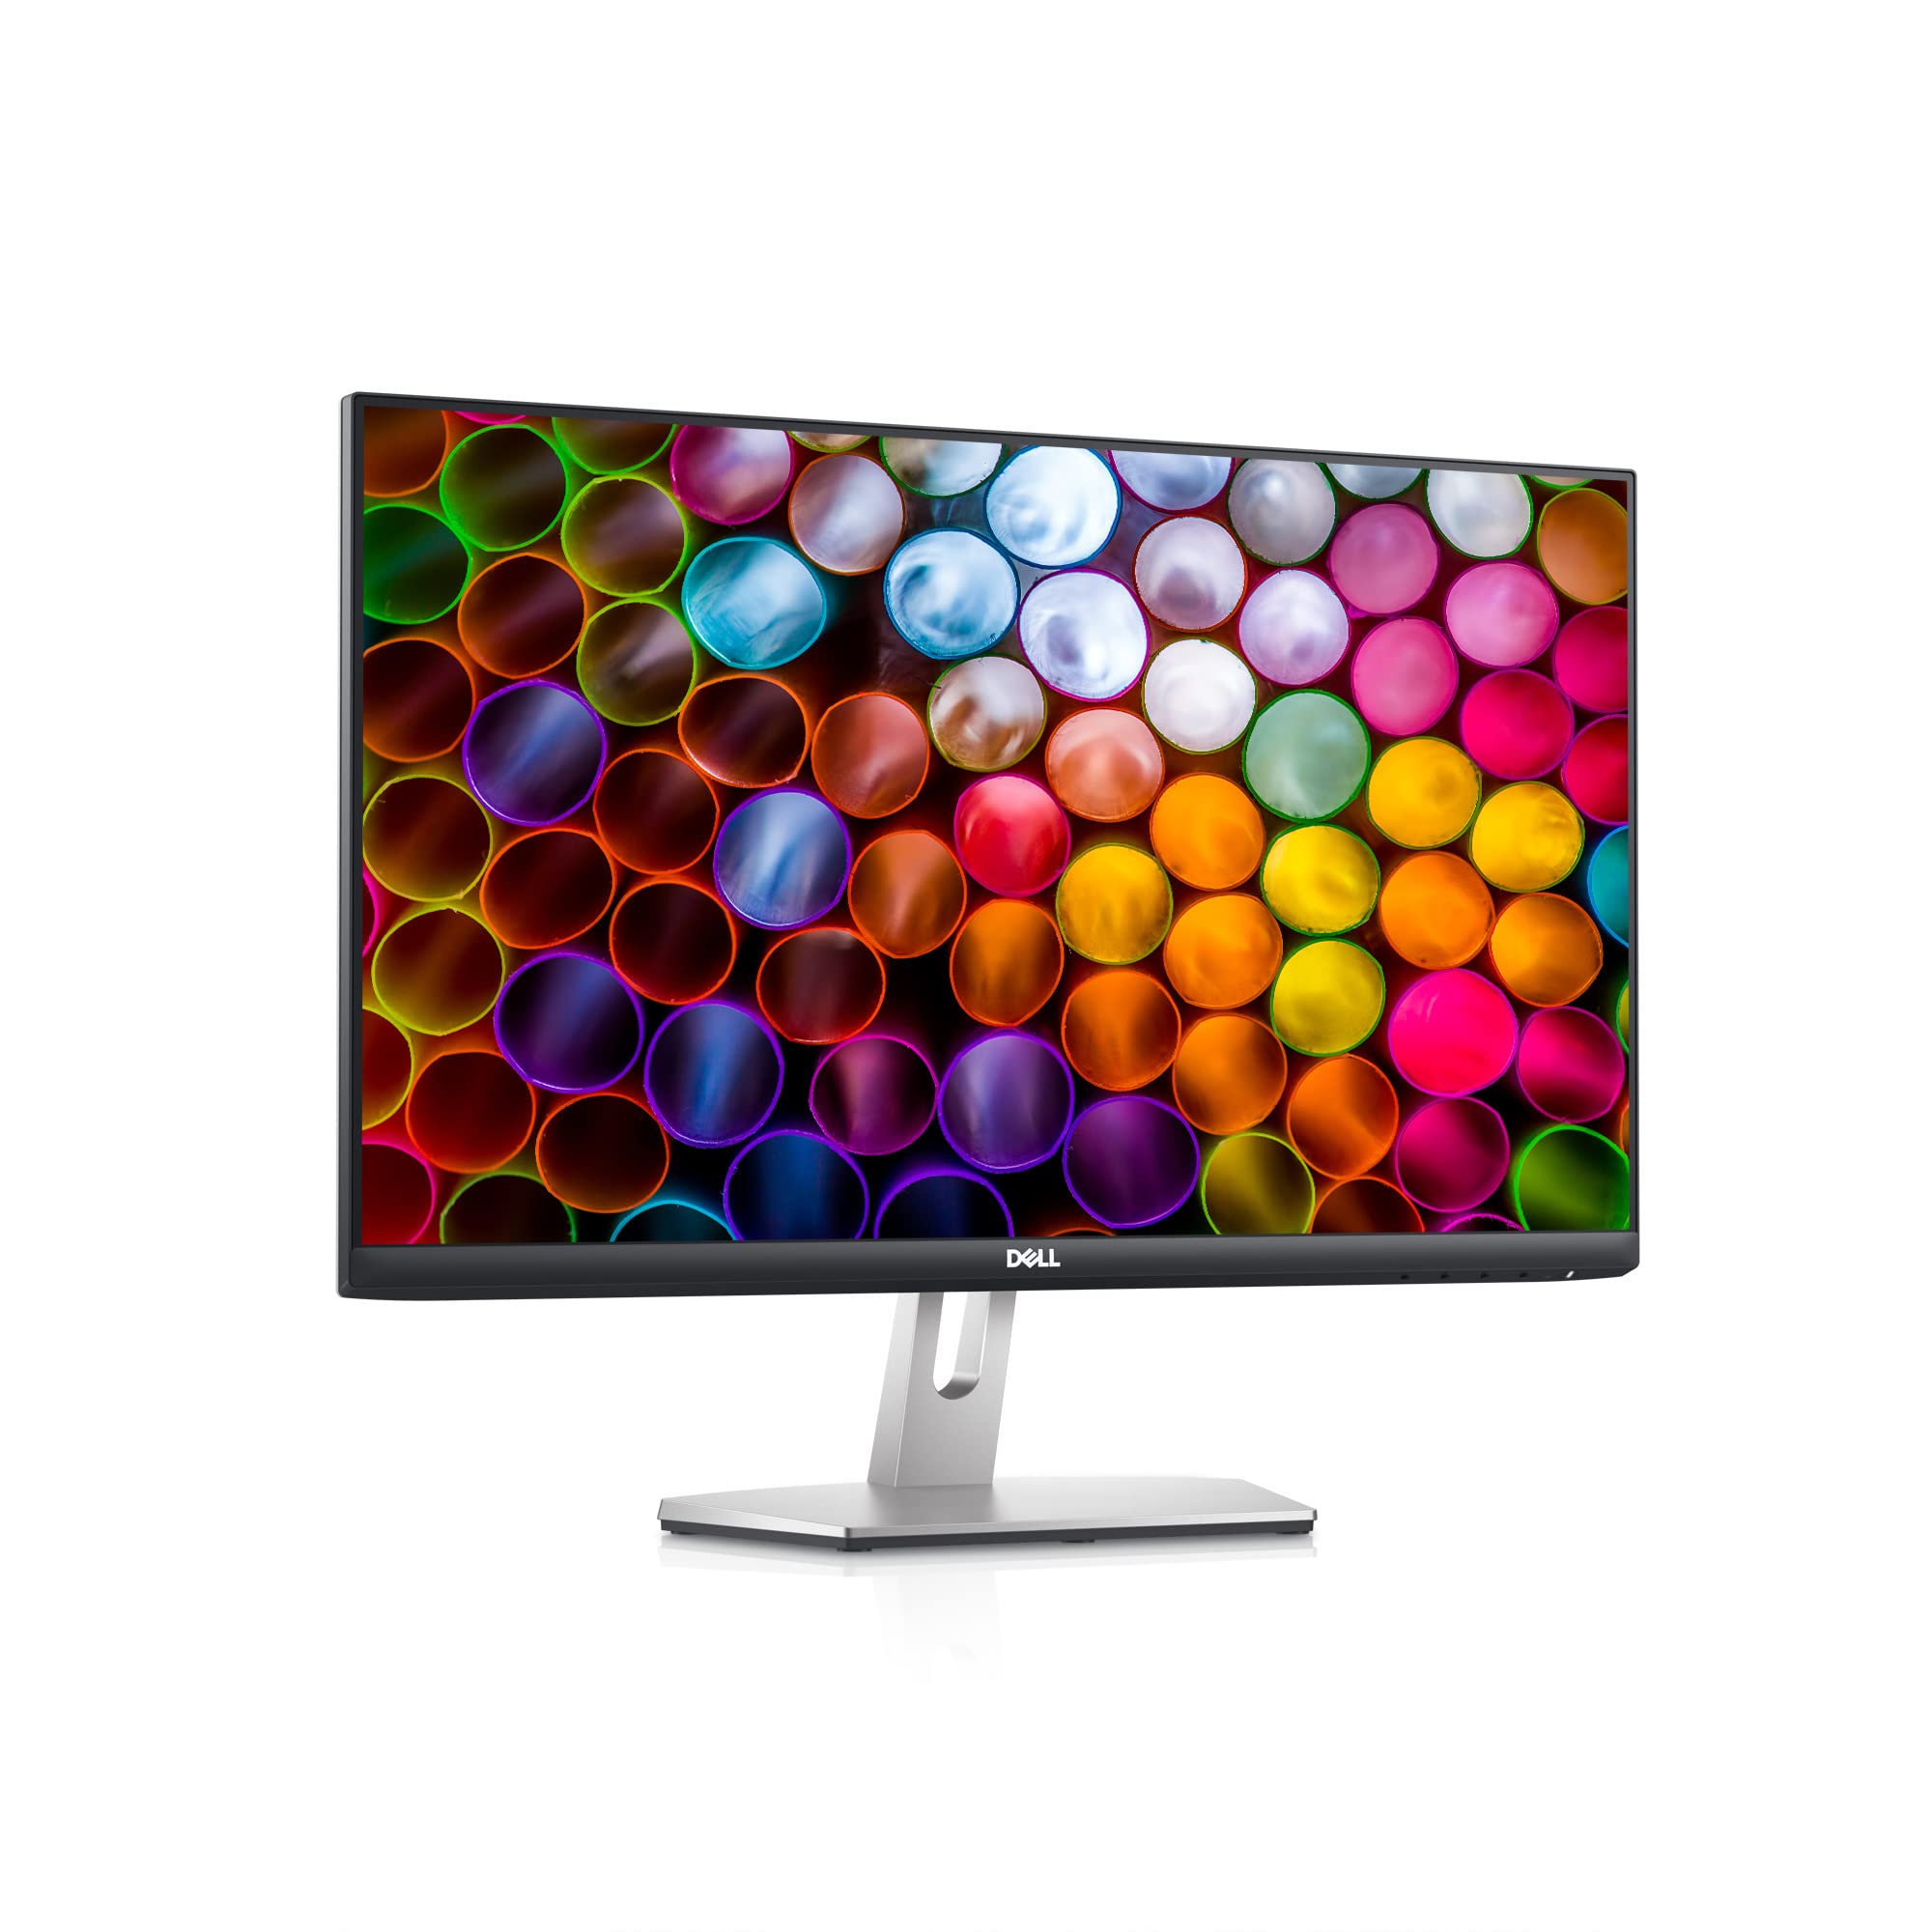 Dell S2421HS Full HD 1920 x 1080, 24-Inch 1080p LED, 75Hz, Desktop Monitor with Adjustable Stand, 4ms Grey-to-Grey Response Time, AMD FreeSync, IPS Technology, HDMI, DisplayPort, Silver